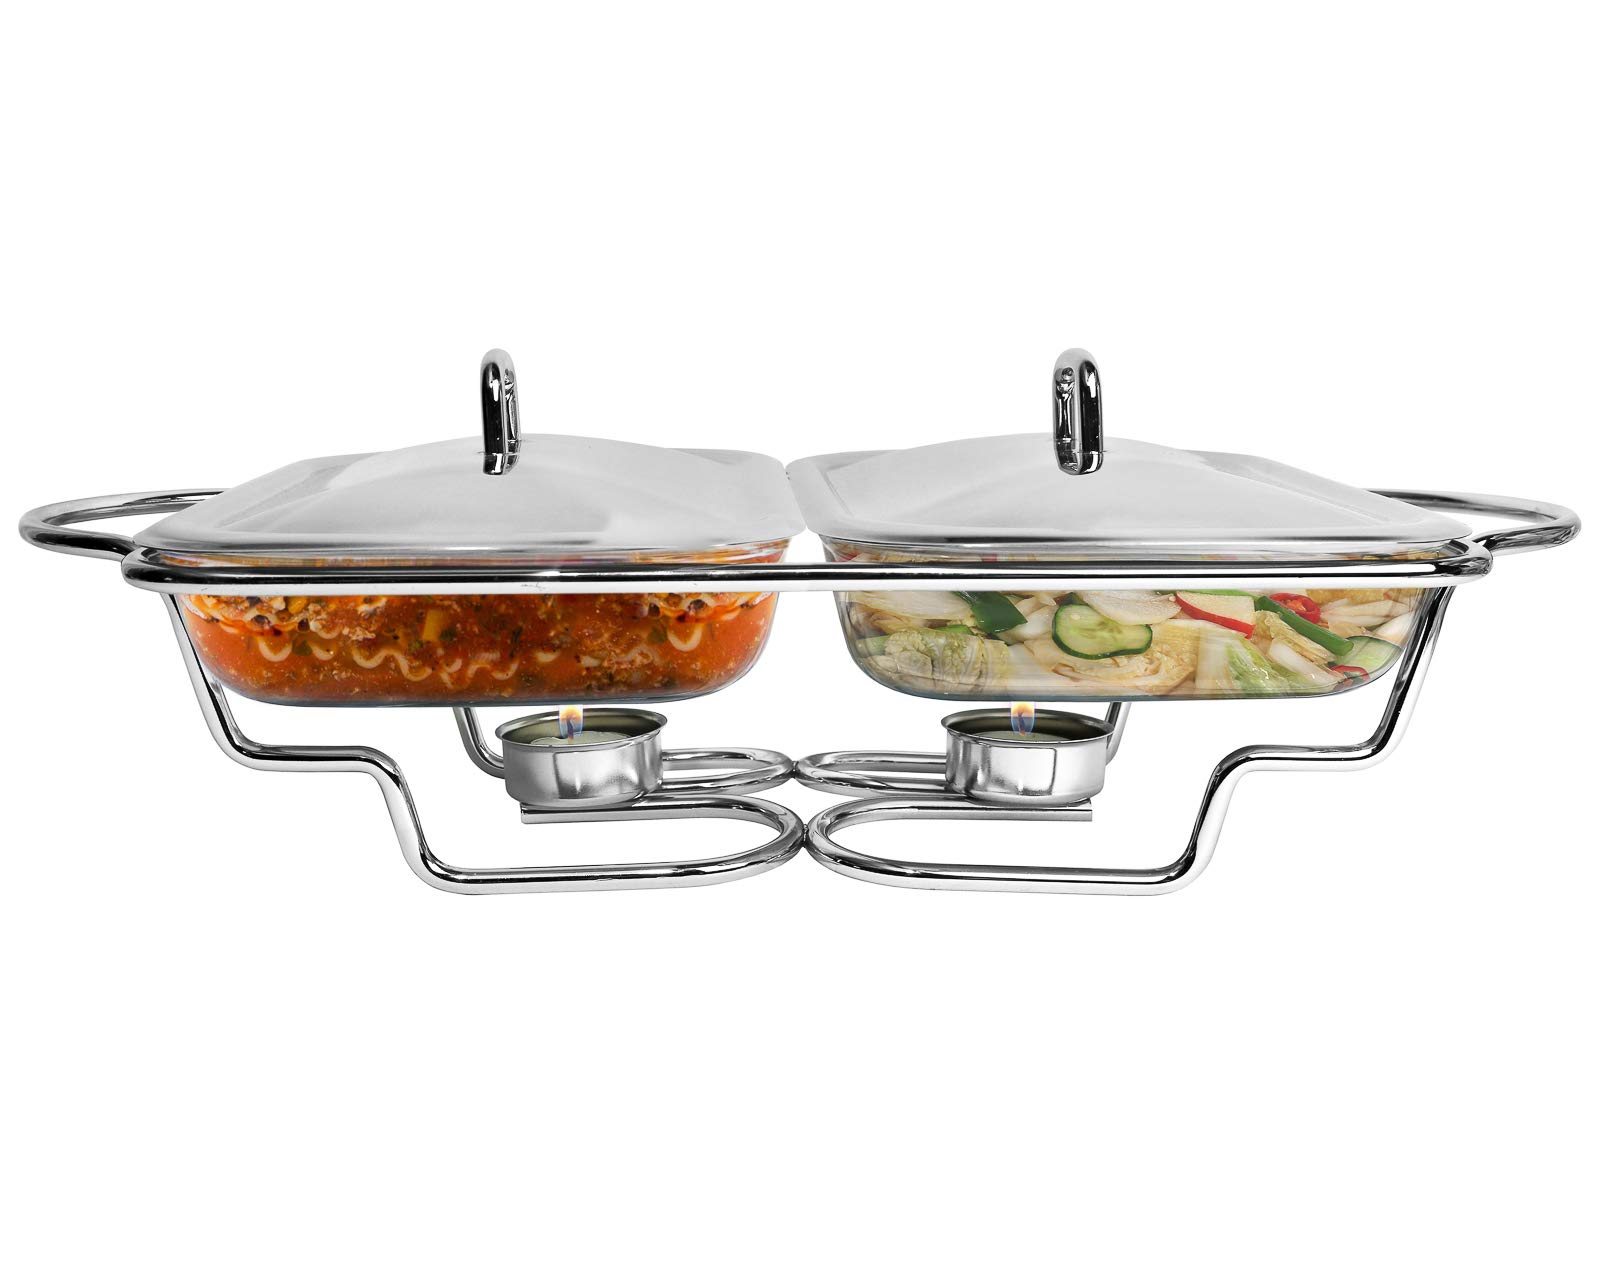 Galashield Chafing Dish Buffet Set Warming Tray with Lids Stainless Steel with 2 Oven Safe Glass Dishes Buffet Servers (1.5-Quart Each Tray)